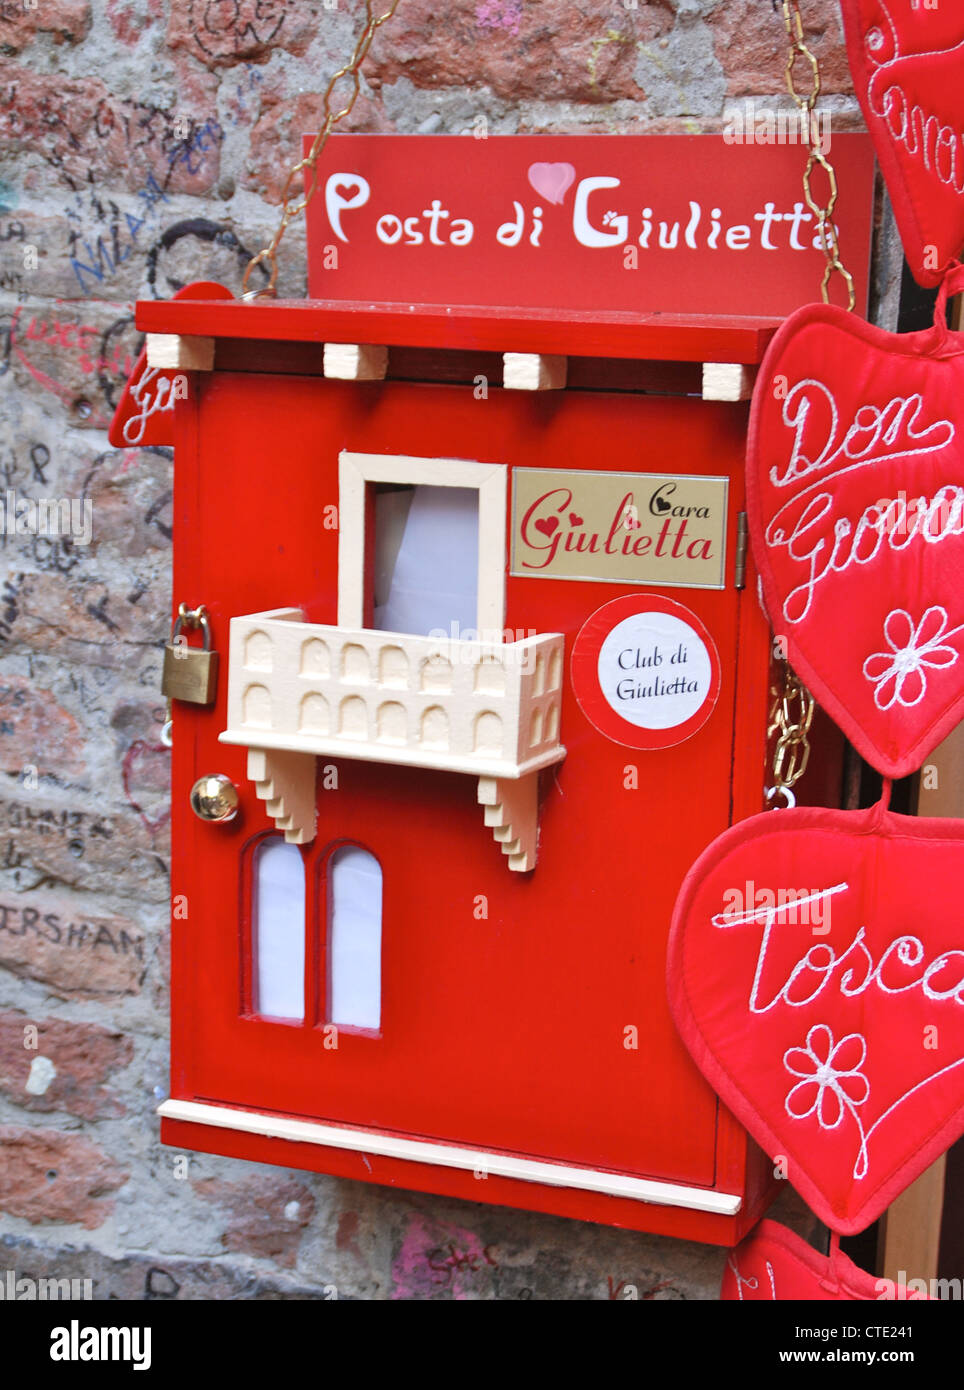 Post box for the club of Juliet Stock Photo - Alamy